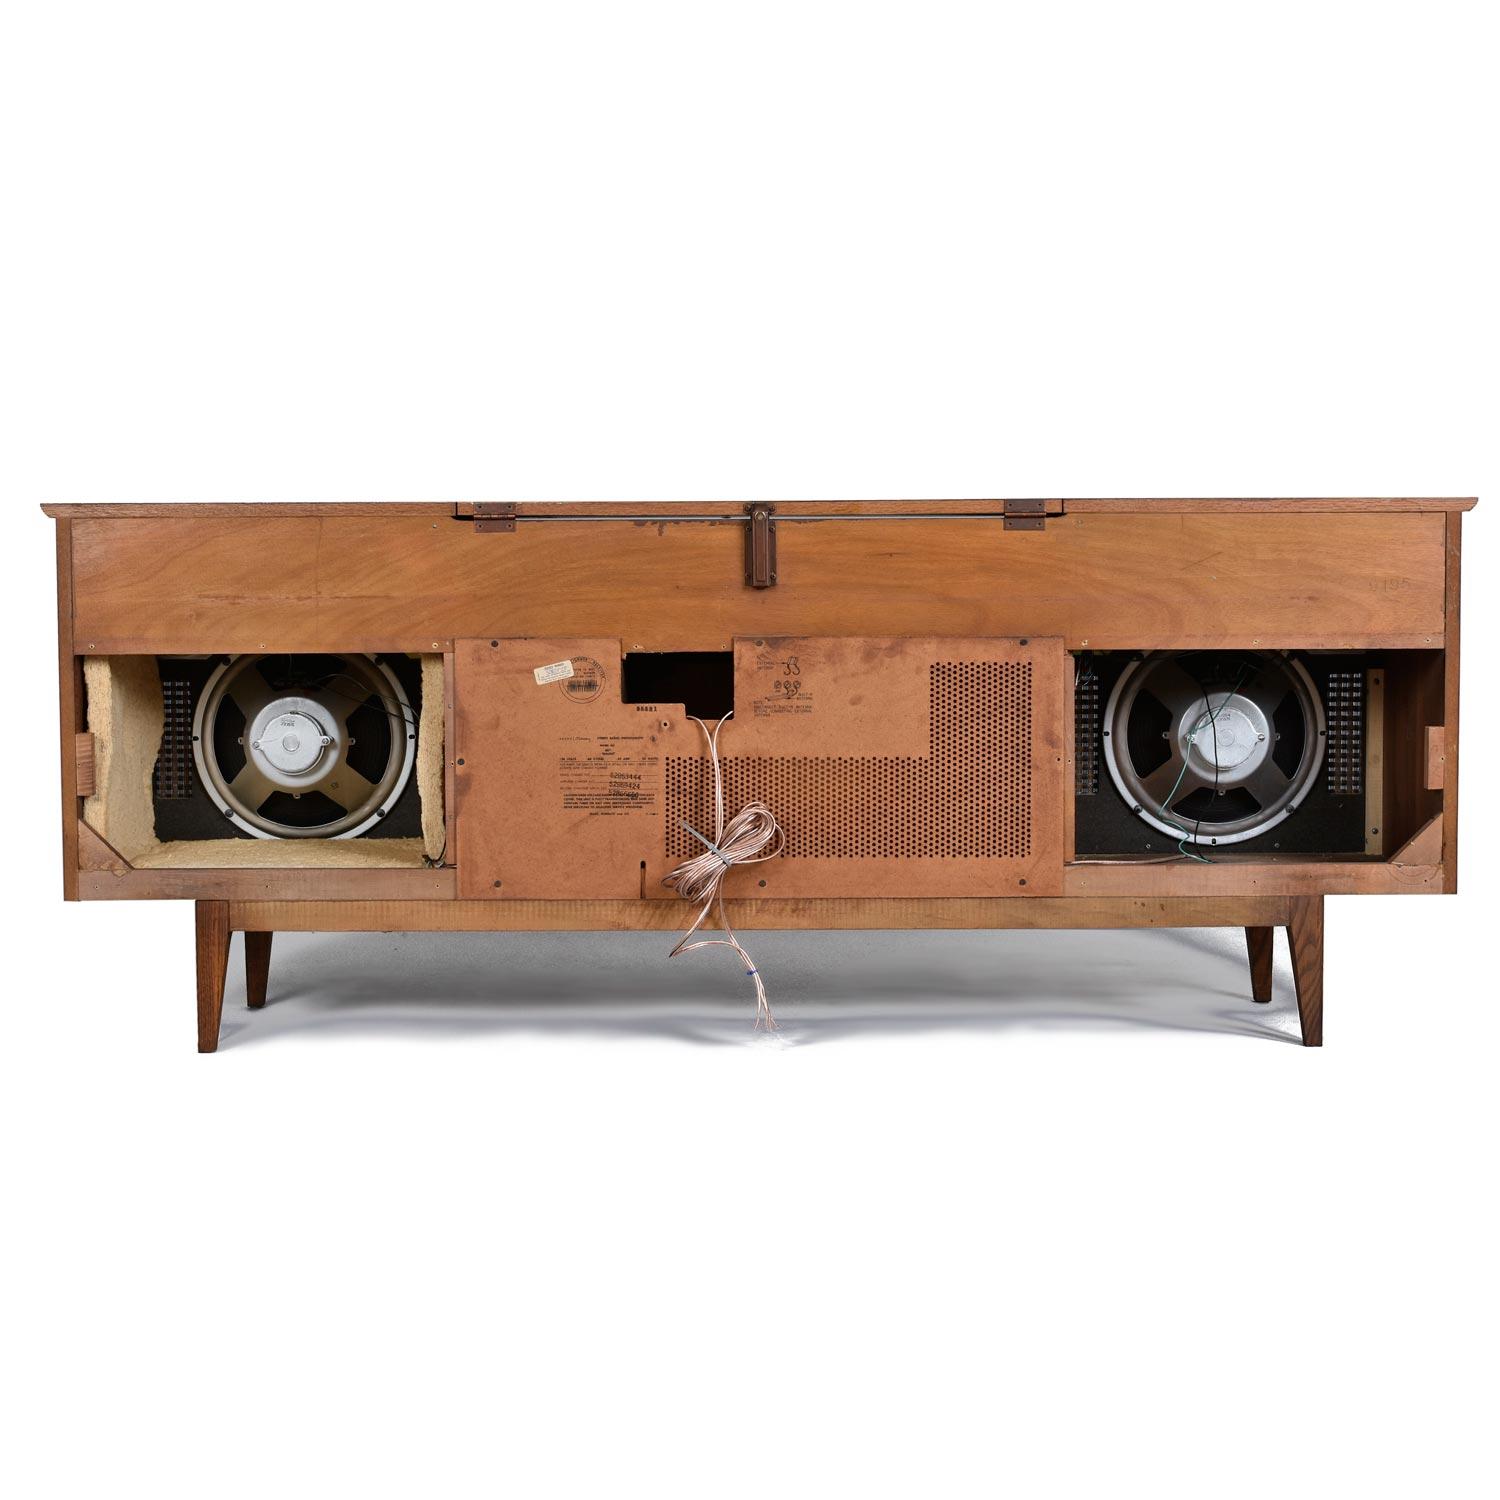 Not only does this Danish Modern style walnut cabinet look handsome AF, but the original speakers sound amazing. We pulled out the clunky old components and left the original 12